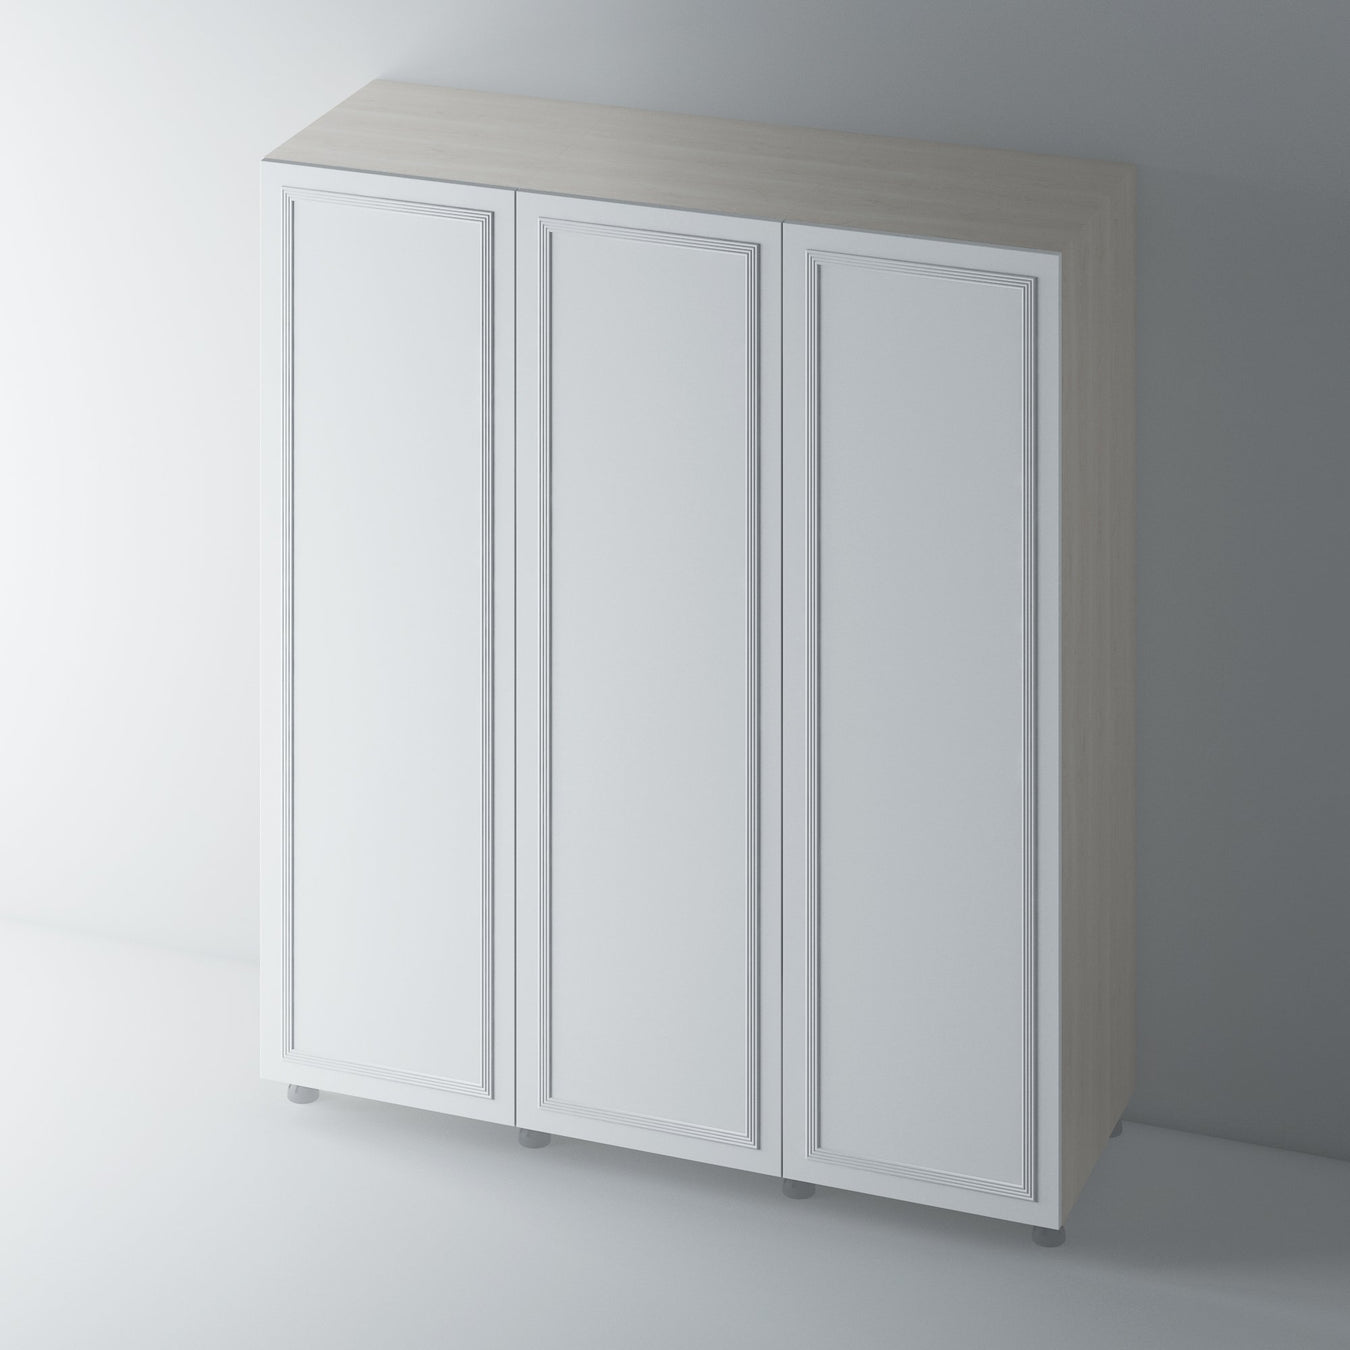 Primed Flat Panel Wardrobe Doors with Reed Moulding